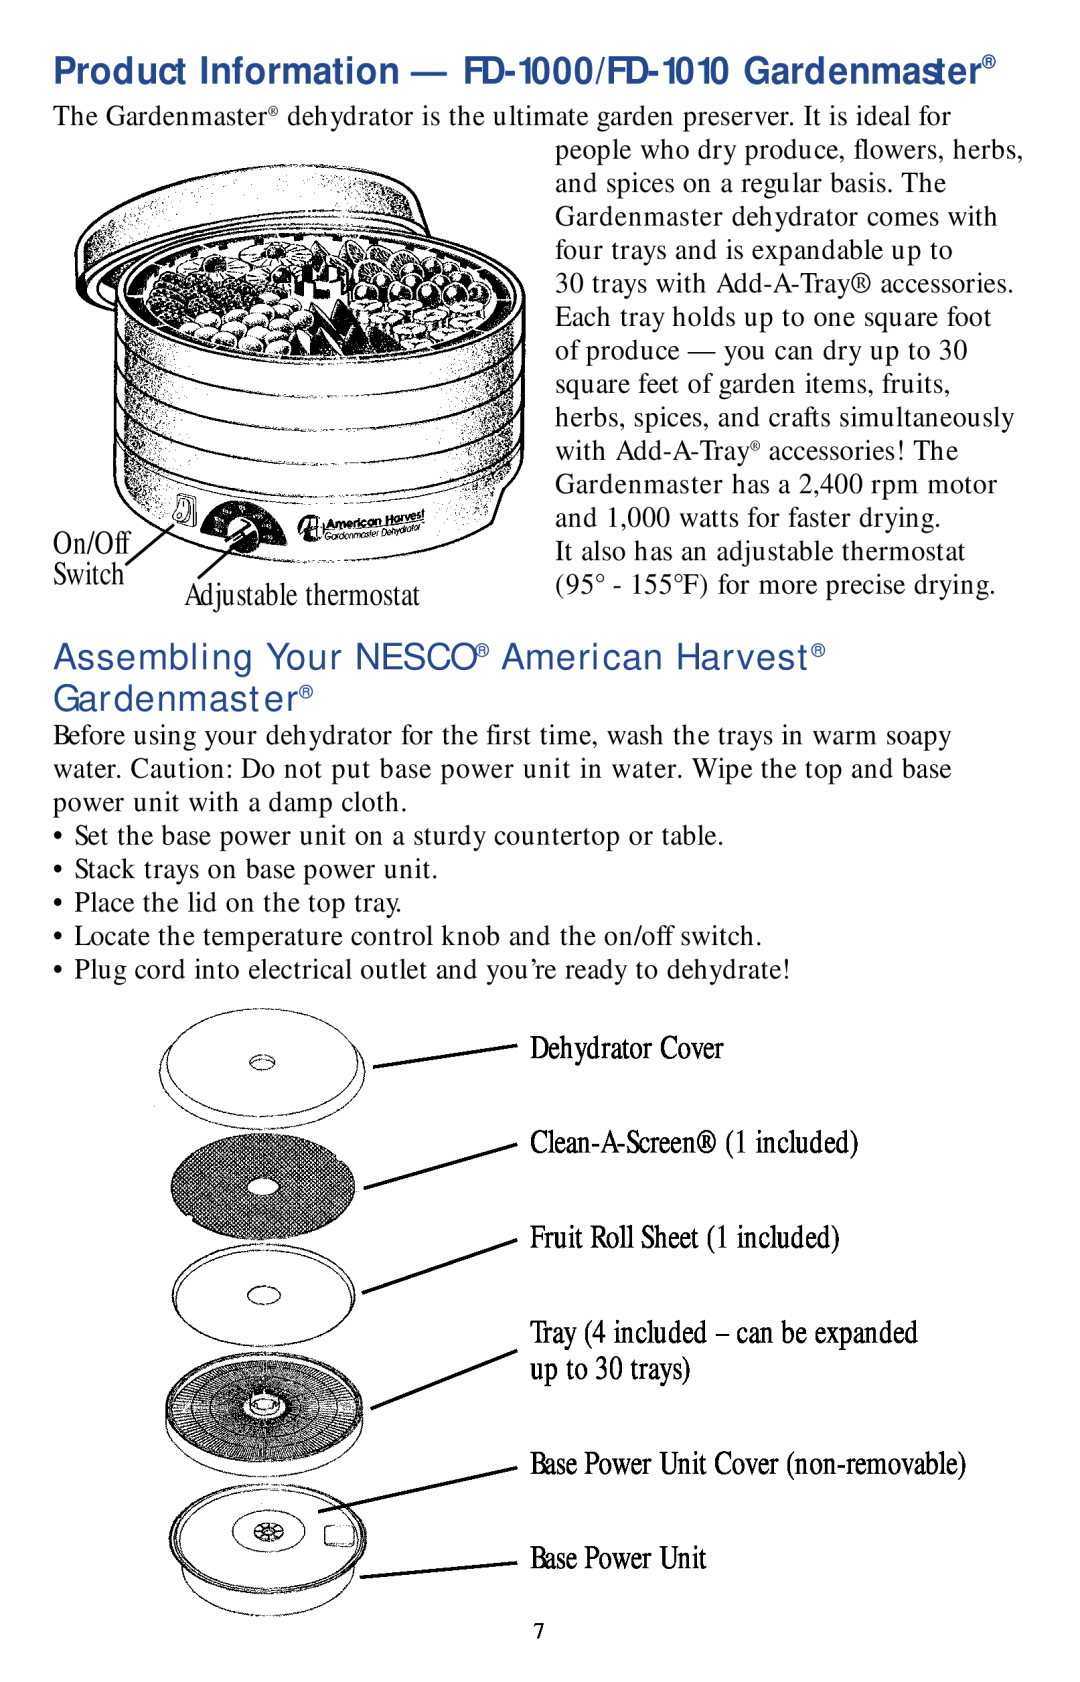 Nesco Food Dehydrator manual Product Information - FD-1000/FD-1010 Gardenmaster, Switch, Adjustable thermostat 